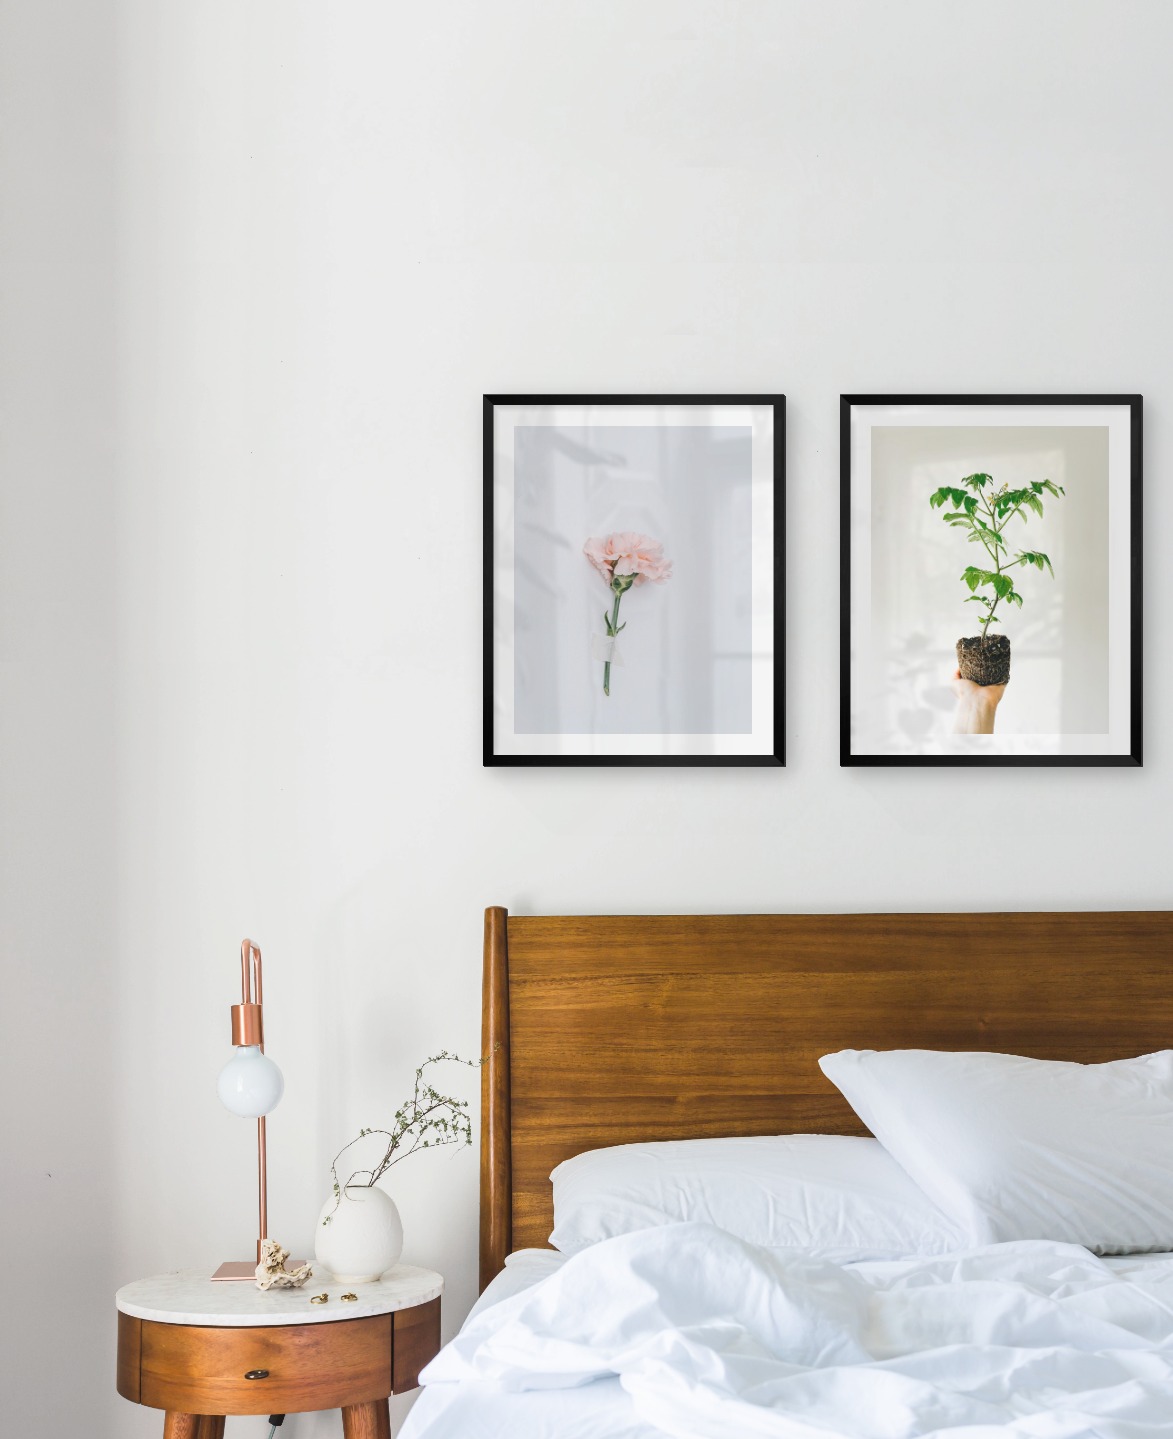 Gallery wall with picture frames in black in sizes 40x50 with prints "Pink flower" and "Plant"